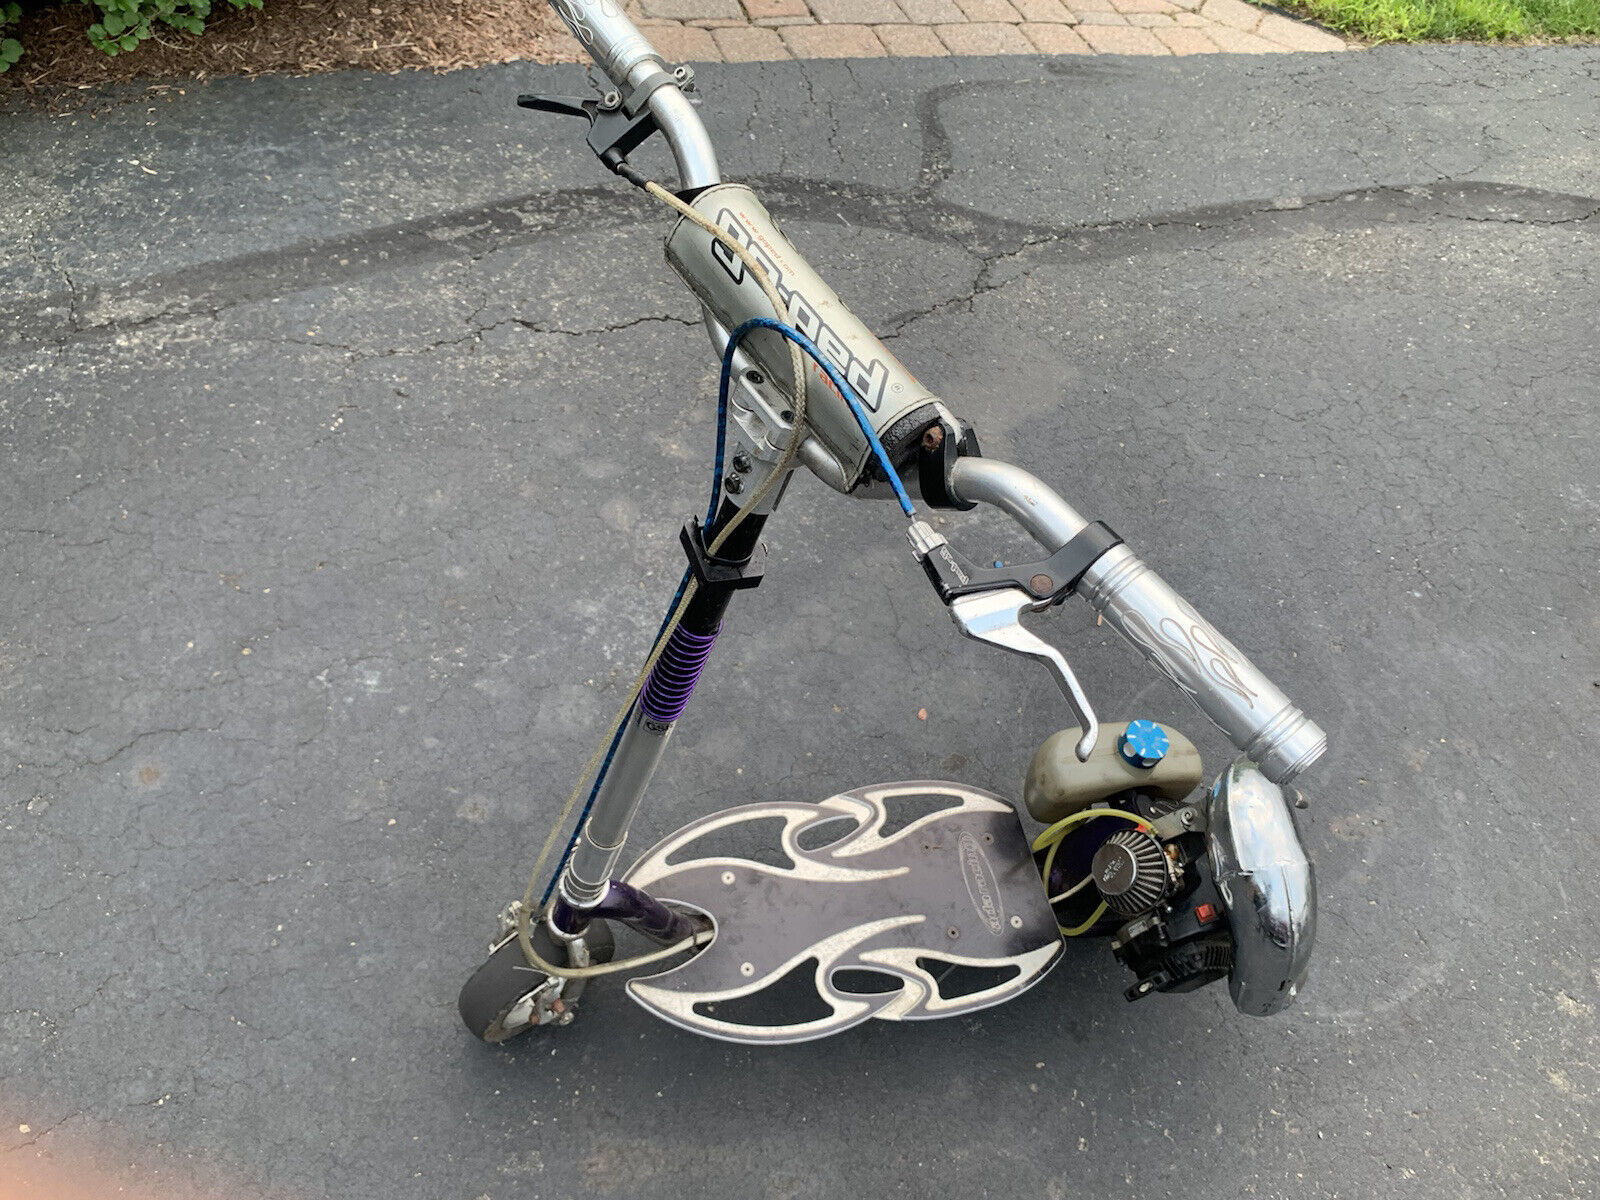 go-ped scooters